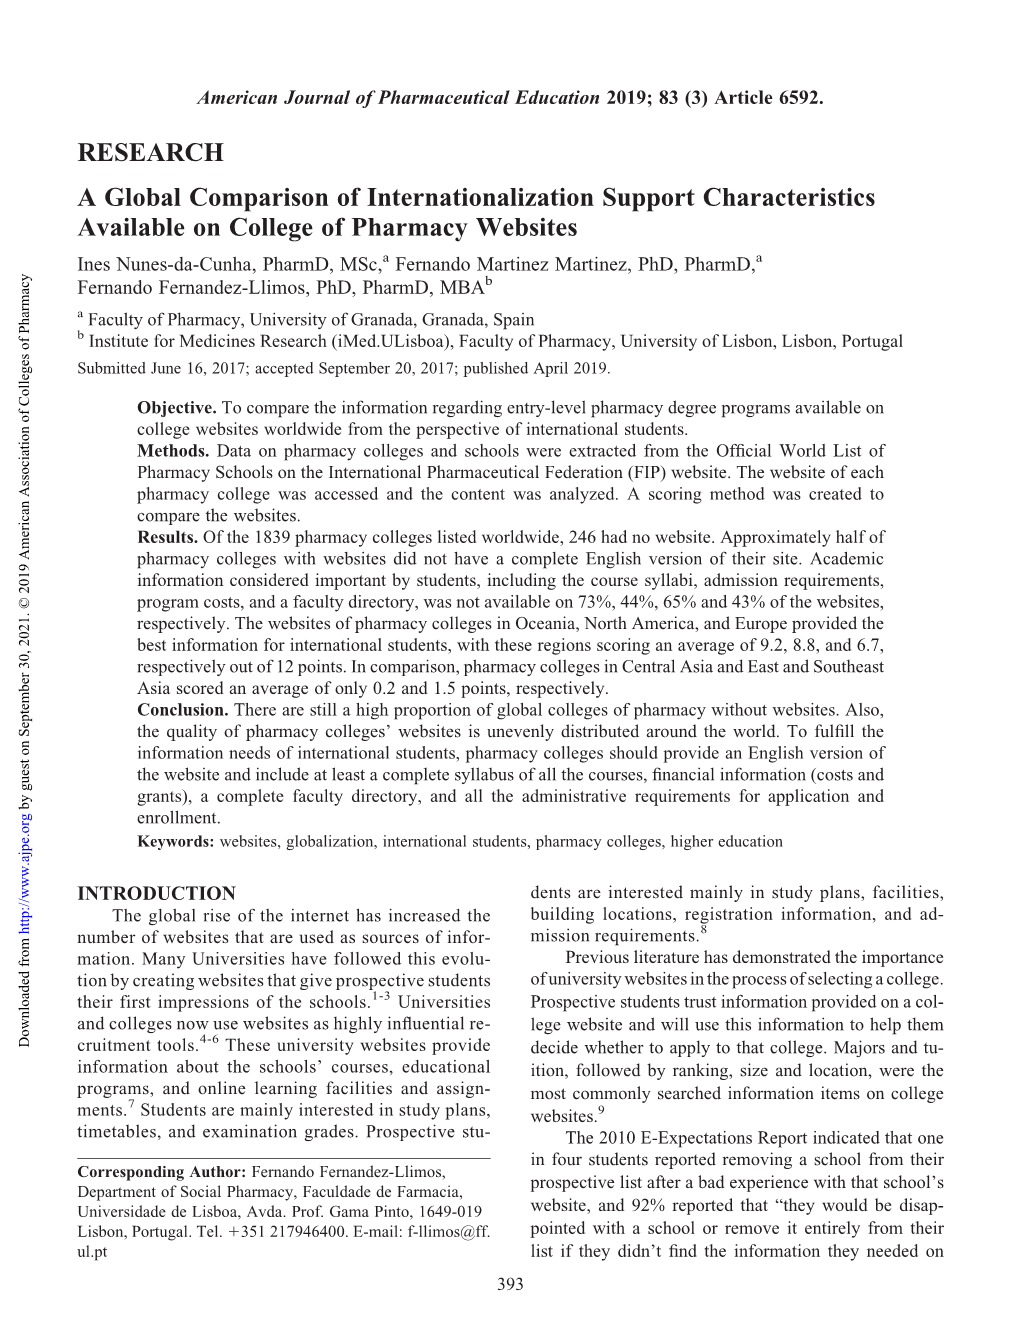 A Global Comparison of Internationalization Support Characteristics Available on College of Pharmacy Websites